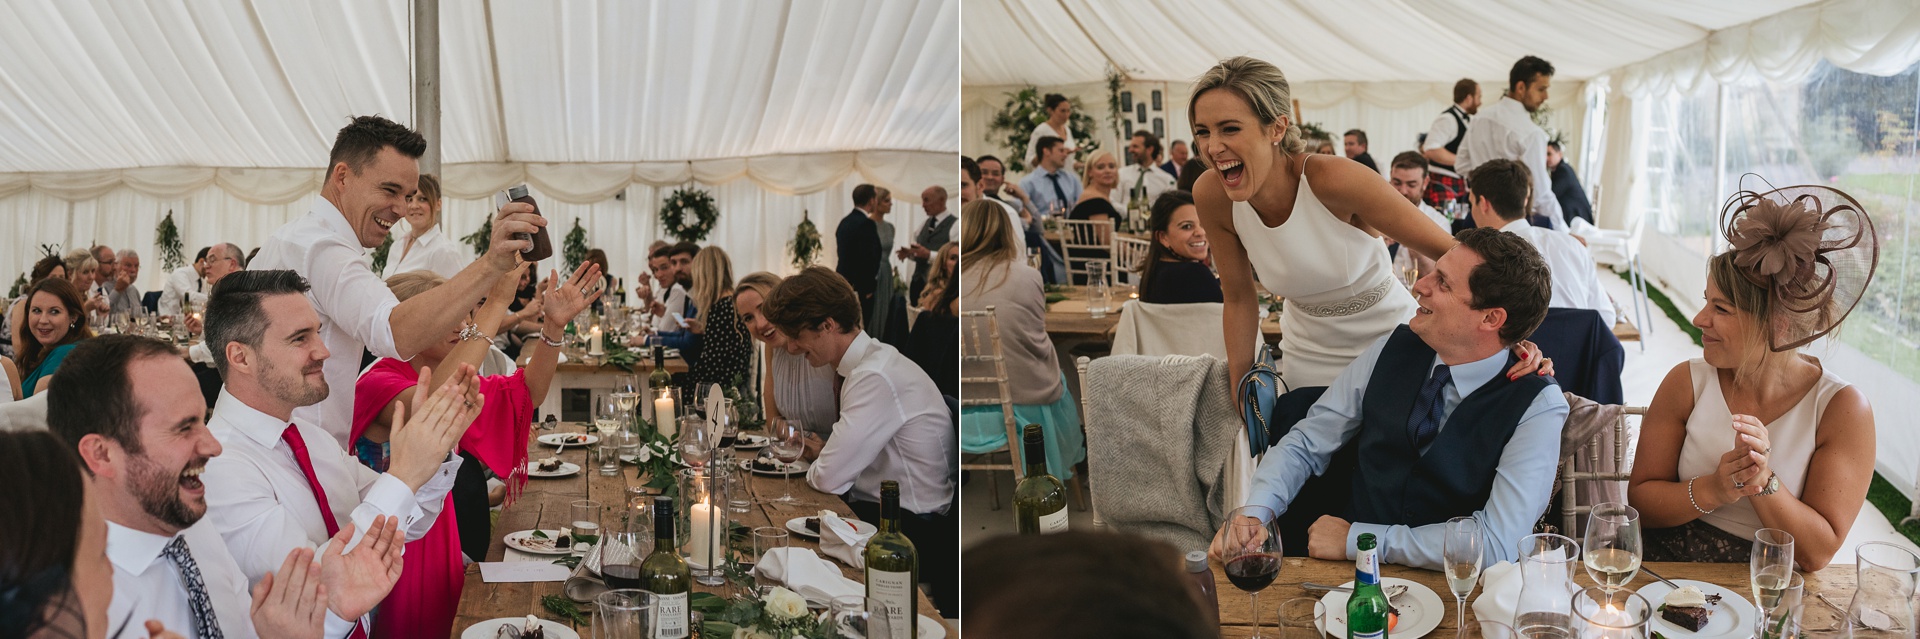 Bride and wedding guests laughing in a marquee